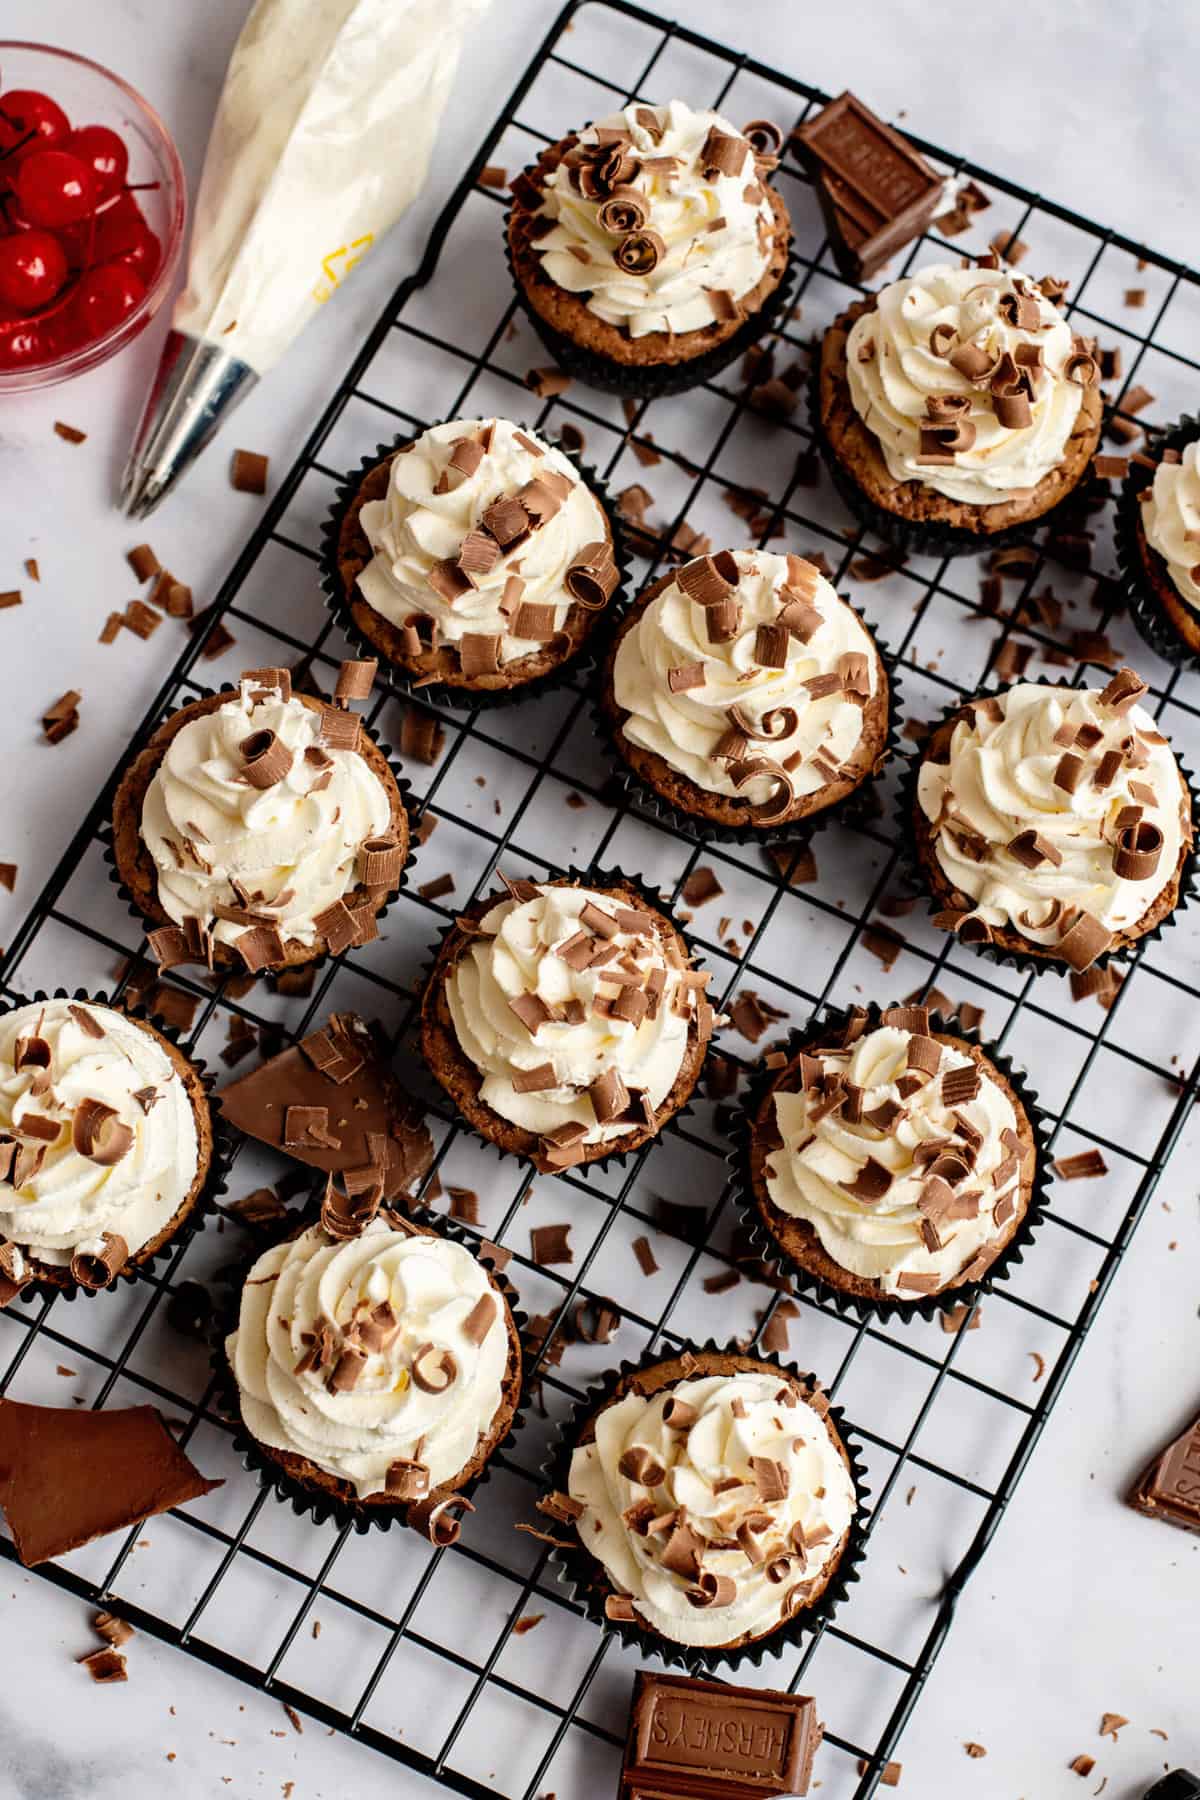 shave chocolate onto frosted cupcakes